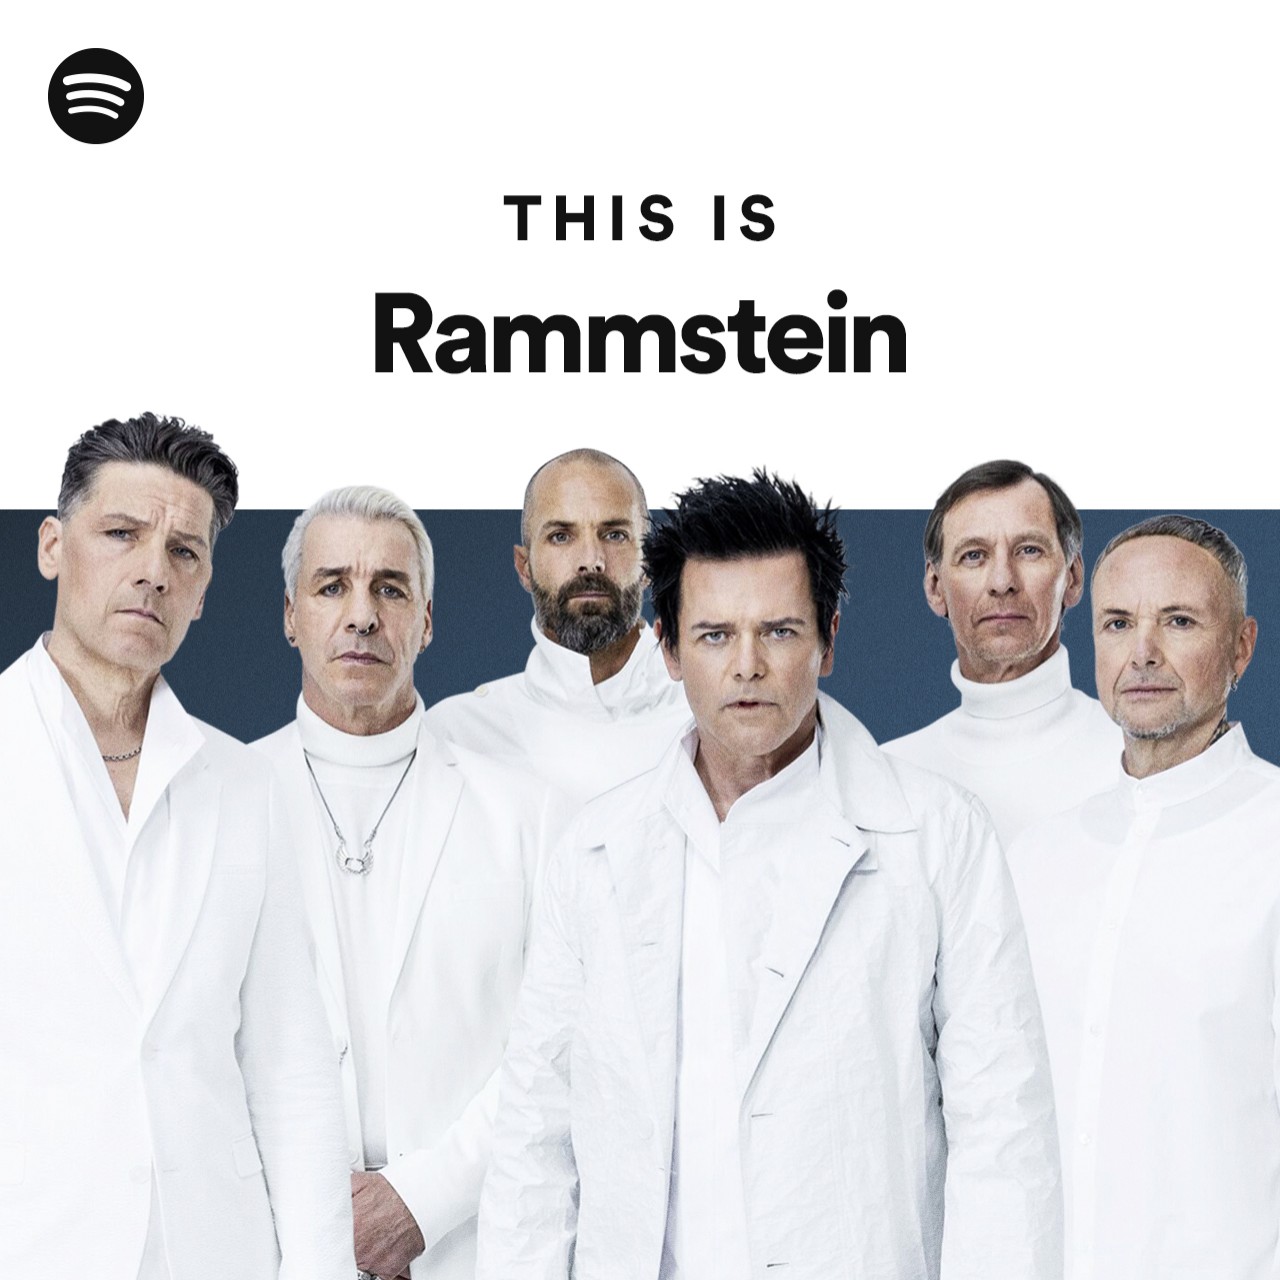 This Is Rammstein